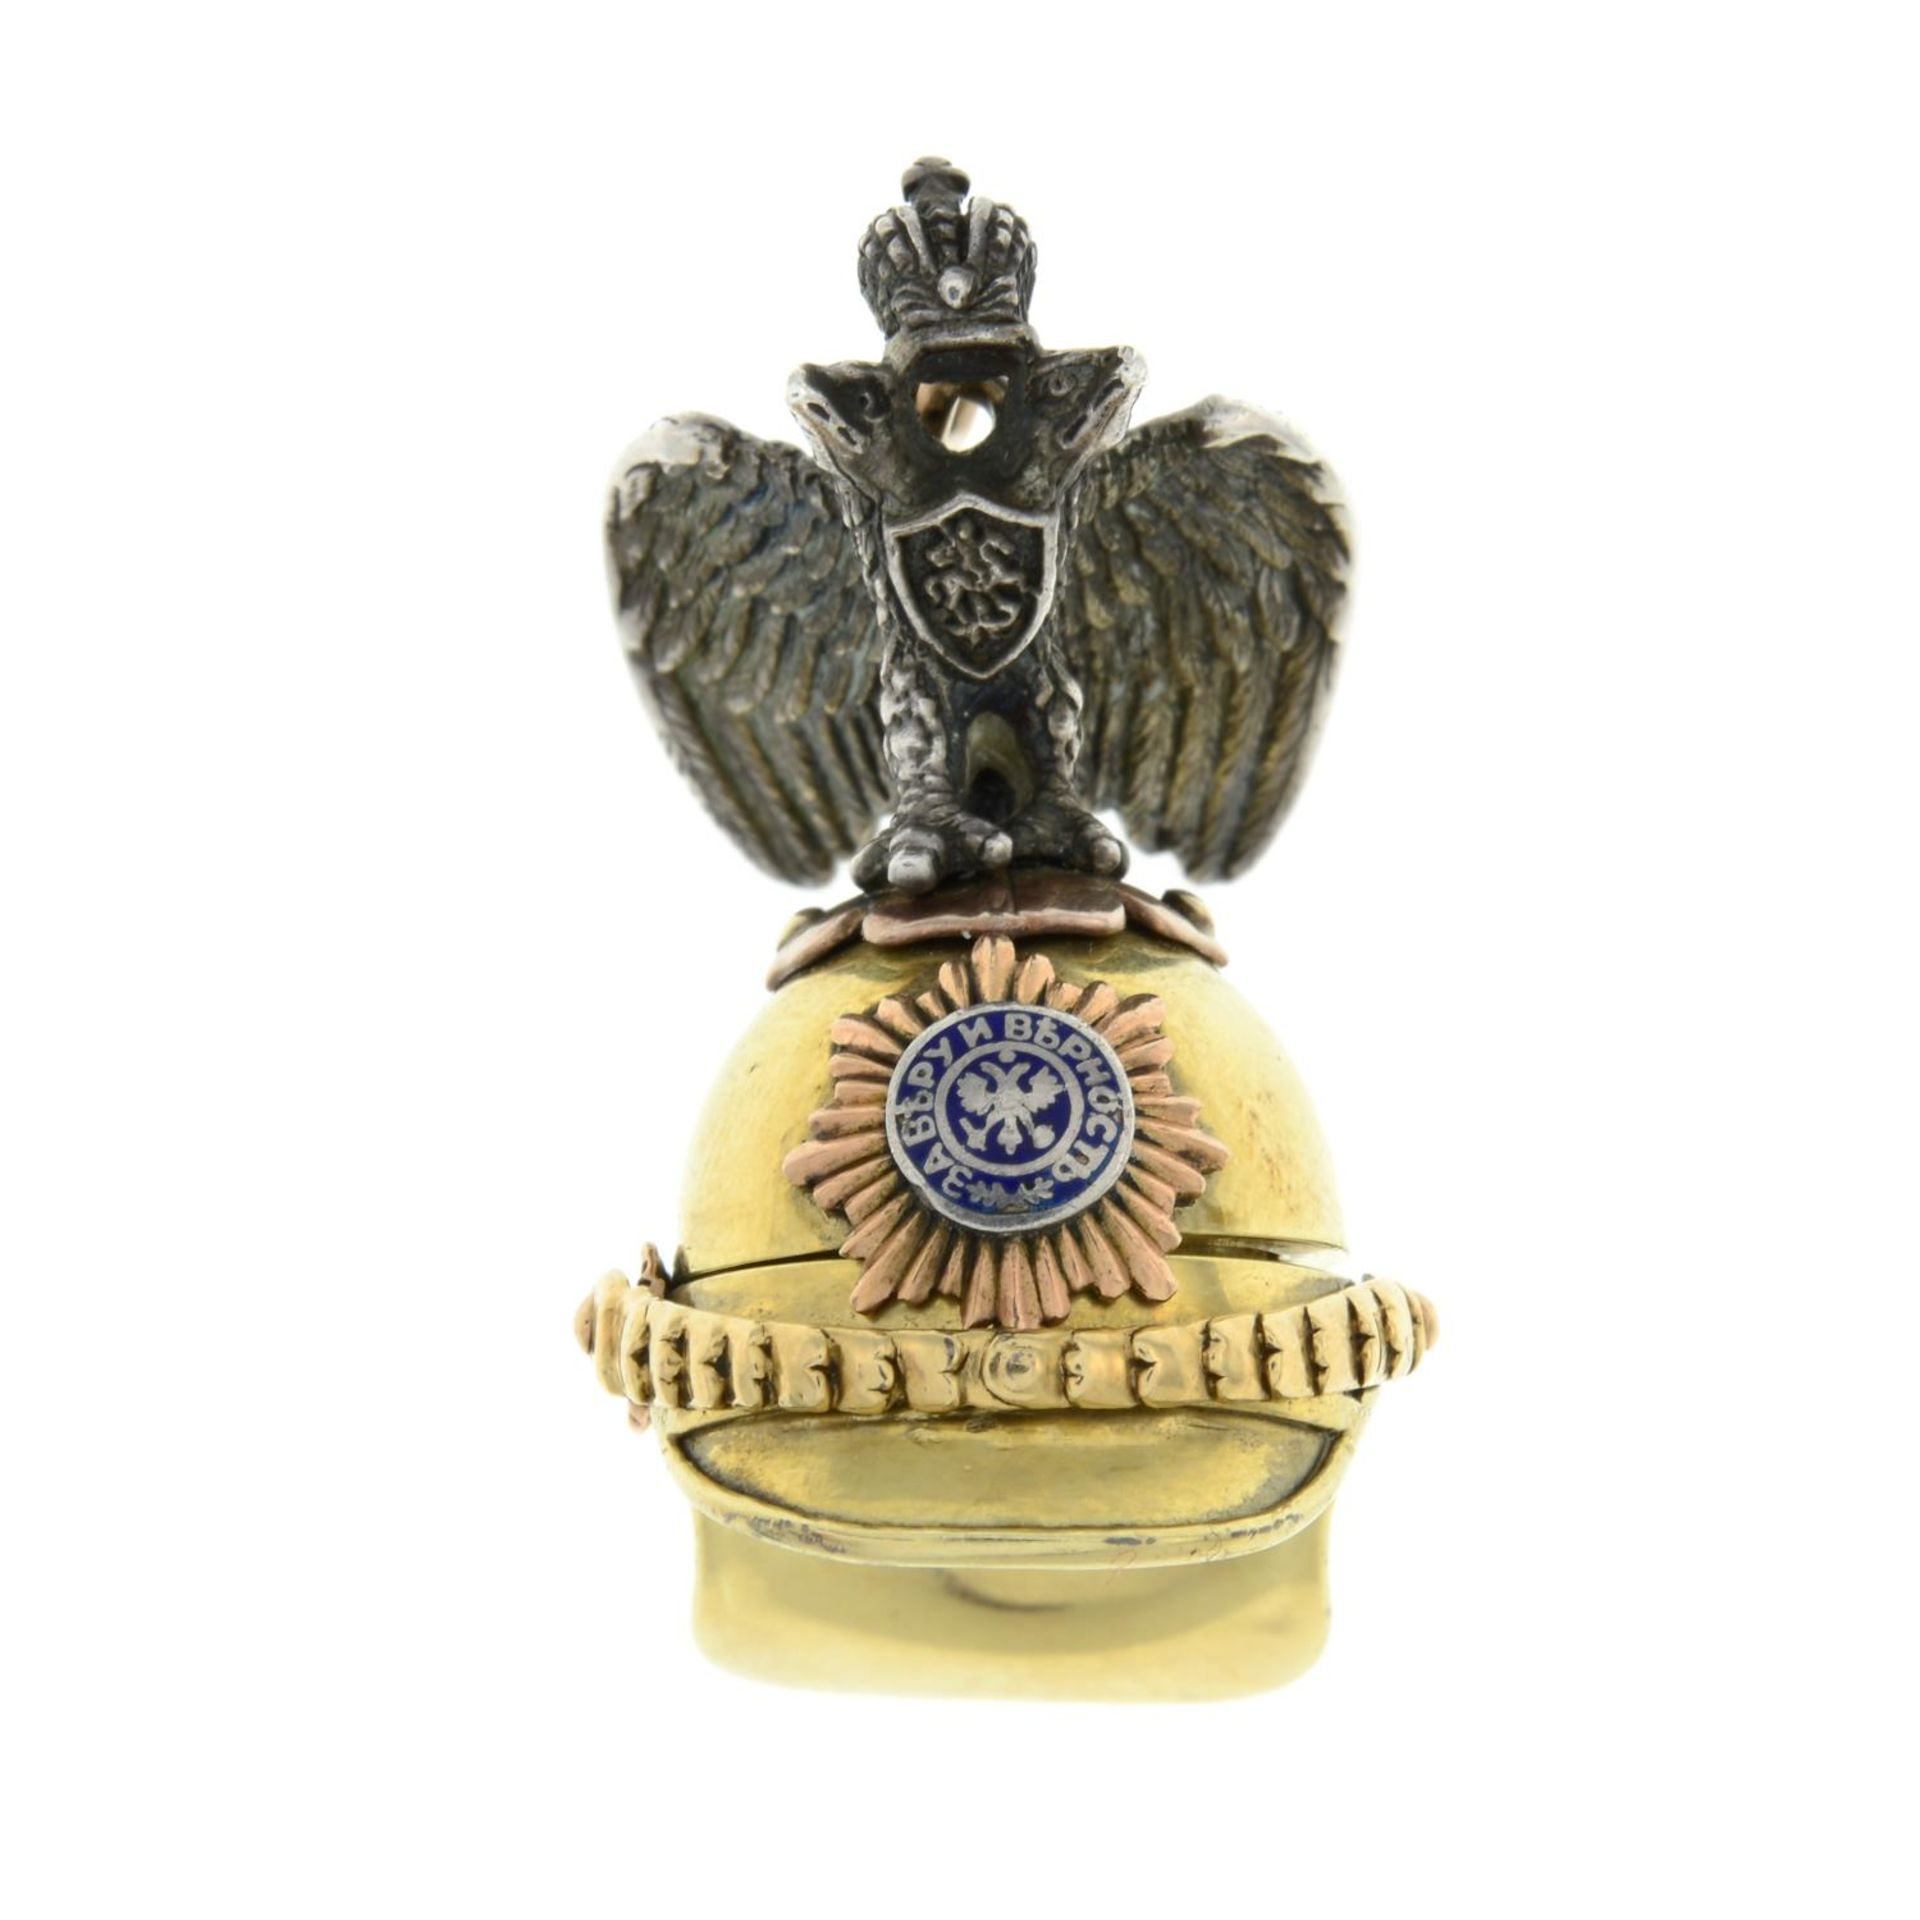 A Russian pre-Revolutionary silver and gold Imperial Russian Garde du Korps NCO's parade helmet - Image 3 of 7